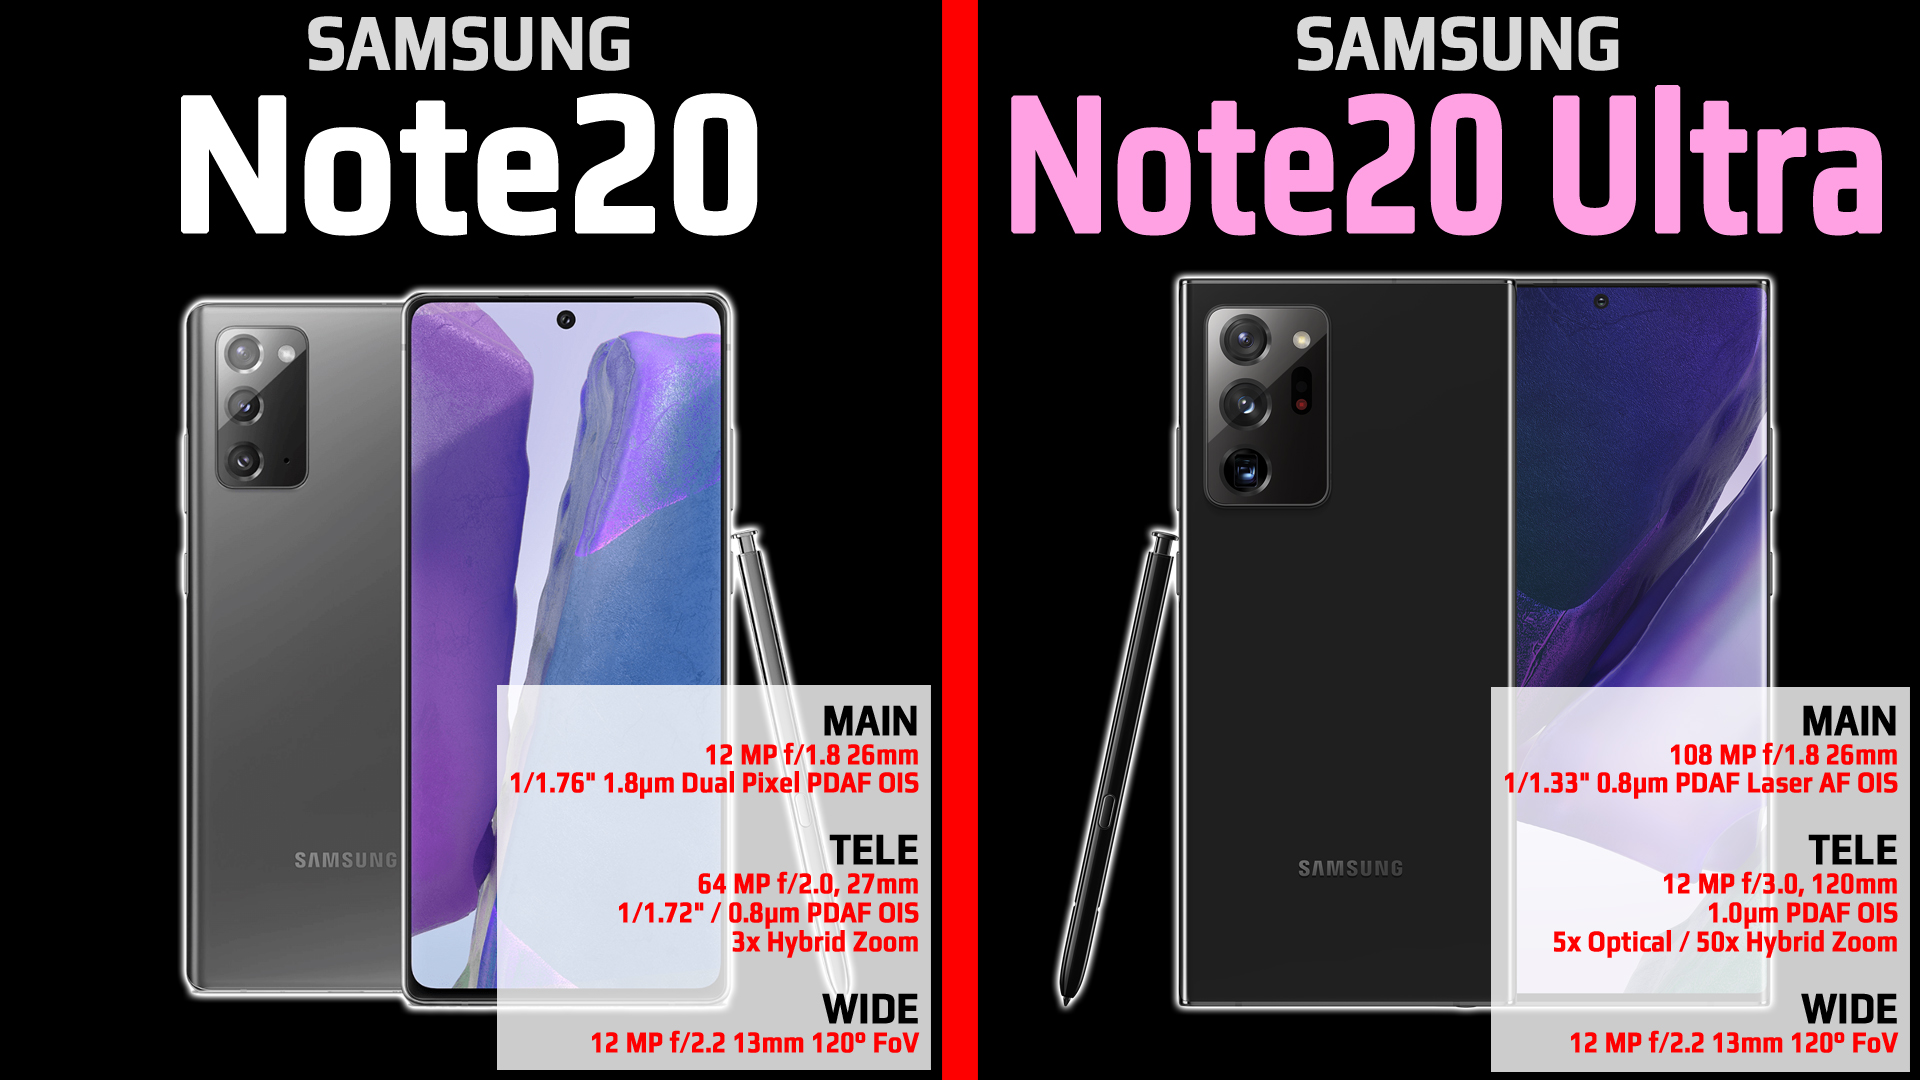 What You Need to Know About Samsung's Galaxy Note20 and Note20